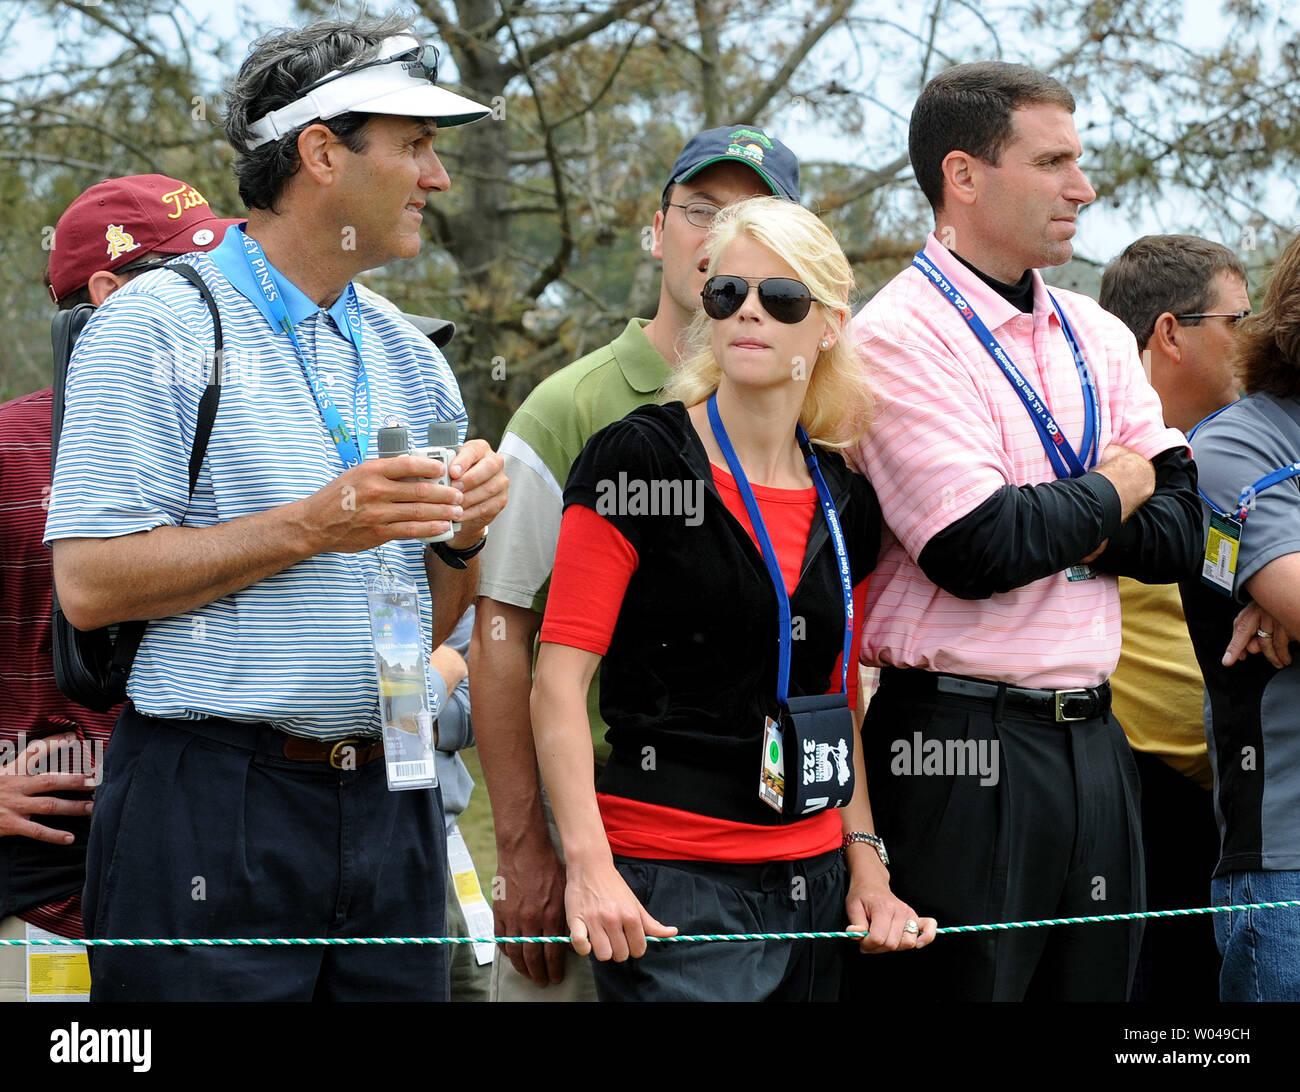 Tiger Woods' wife Elin Nordegren (C) watches Woods as he hits down the 12th fairway during the playoff round at the U.S. Open at Torrey Pines Golf Course in San Diego on June 16, 2008. Woods won the 108th U.S. Open defeating Rocco Mediate by one stroke on a sudden death playoff hole during a playoff round. (UPI Photo/Kevin Dietsch) Stock Photo